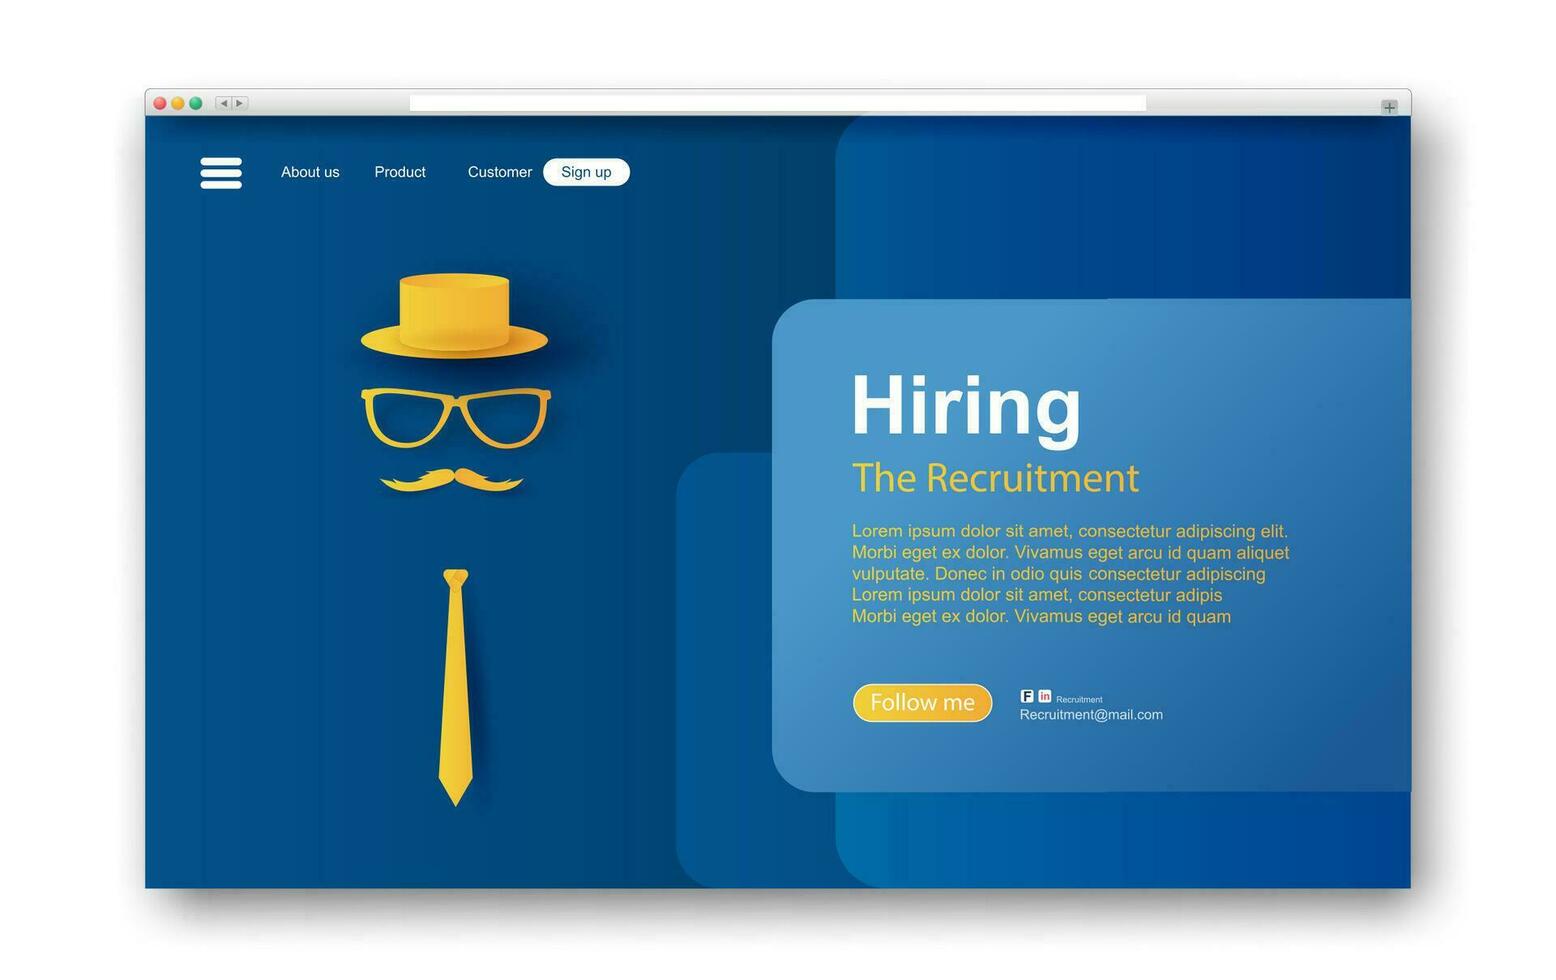 3D illustration of Hiring and recruitment business concept.Creative interface web design Paper art and craft with minimalist style.hat,tie,glasses,Mustache,job offers, job advertisement,art. vector